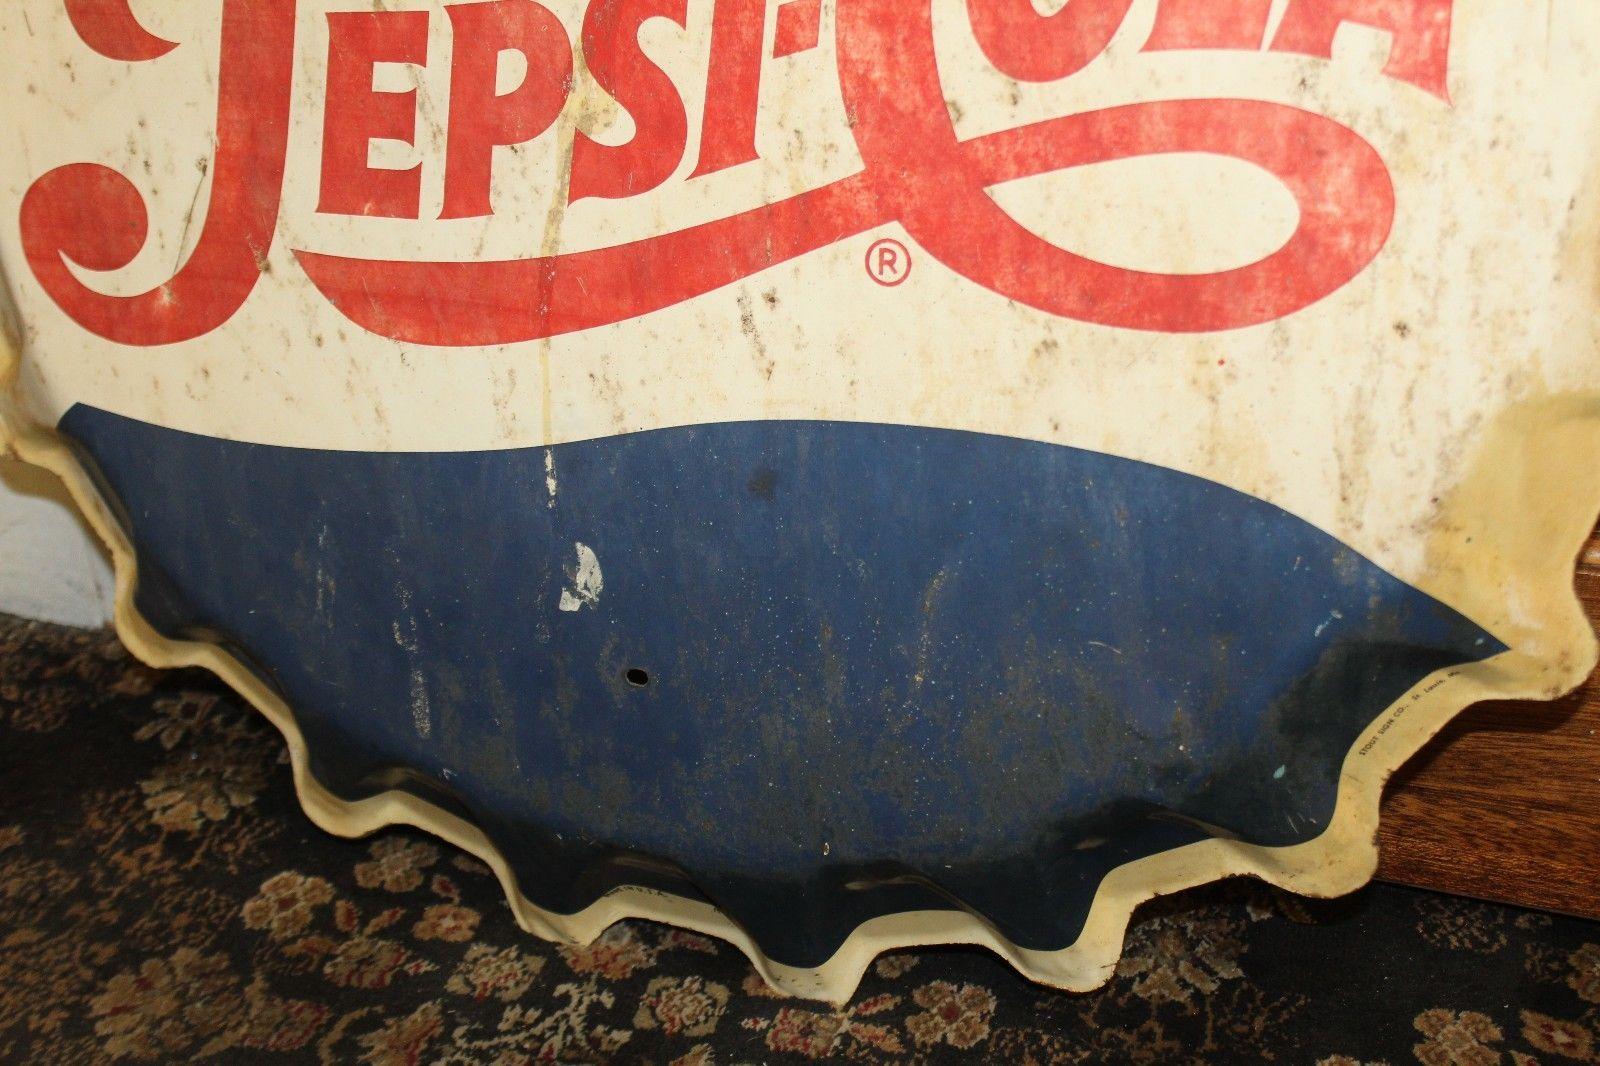 A Classic from the 1950s, a metal sign in the shape of a bottle top. Pepsi didn't produce as many advertising pieces compared to what Coca-Cola did.